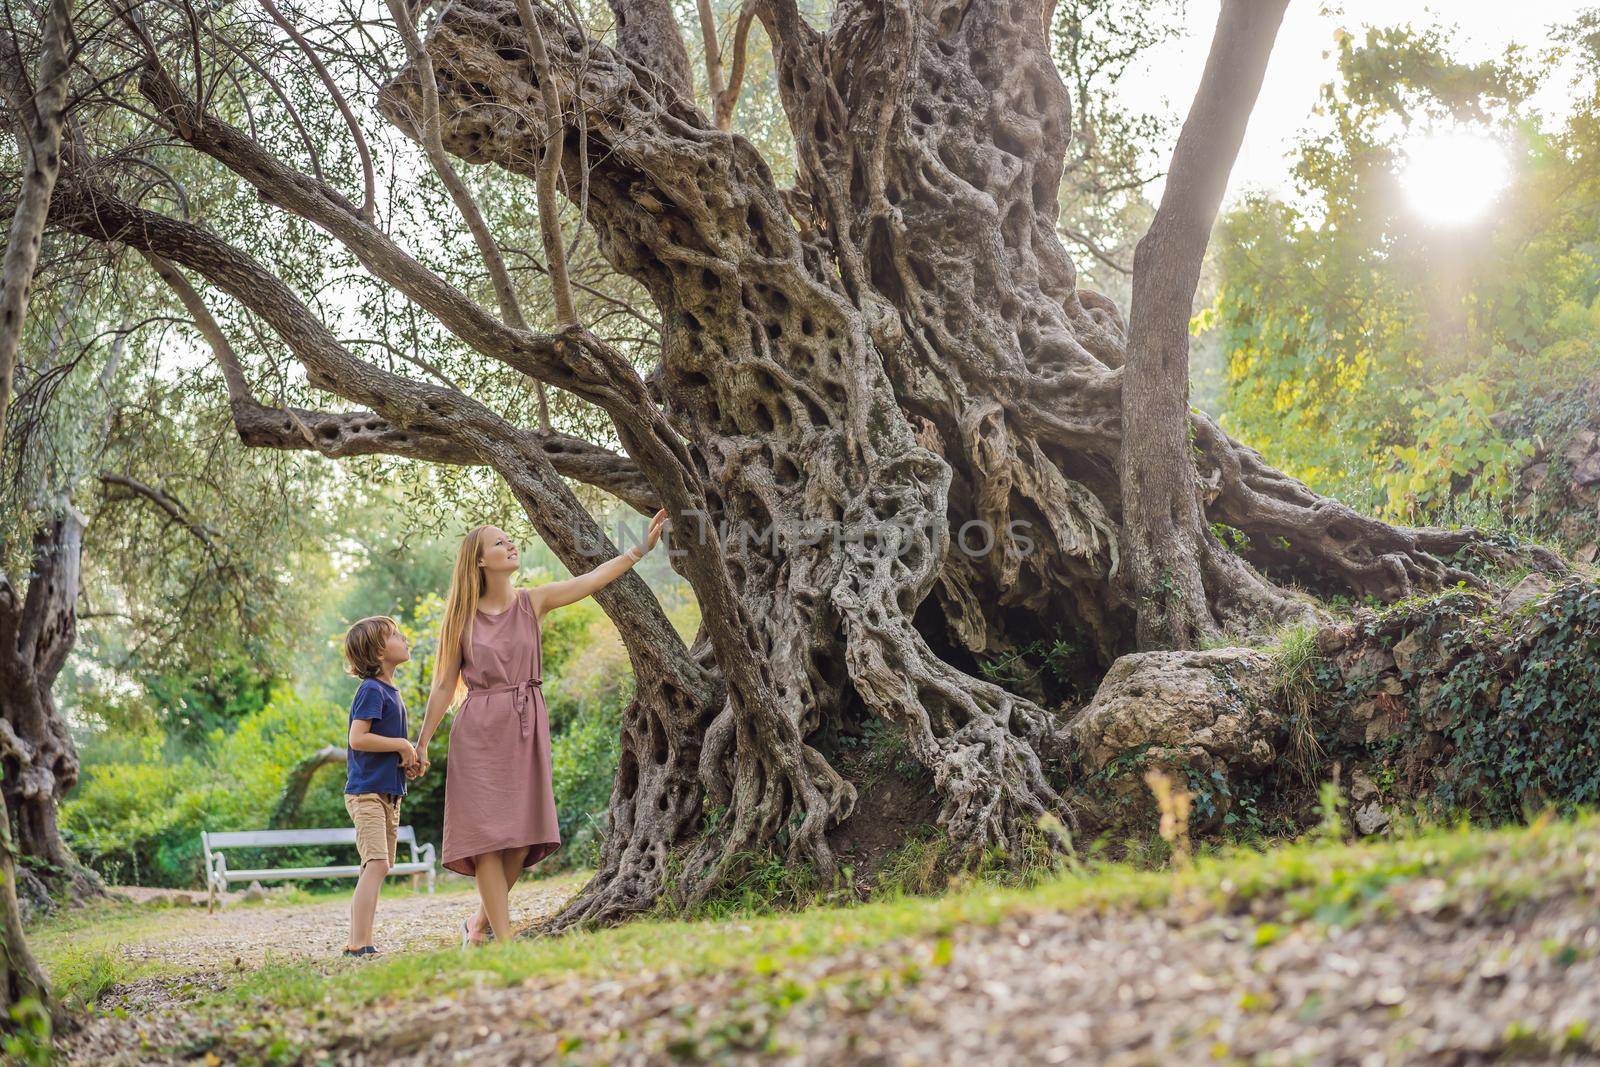 Mom and son tourists looking at 2000 years old olive tree: Stara Maslina in Budva, Montenegro. It is thought to be the oldest tree in Europe and is a tourist attraction. In the background the montenegrin mountains. Europe by galitskaya